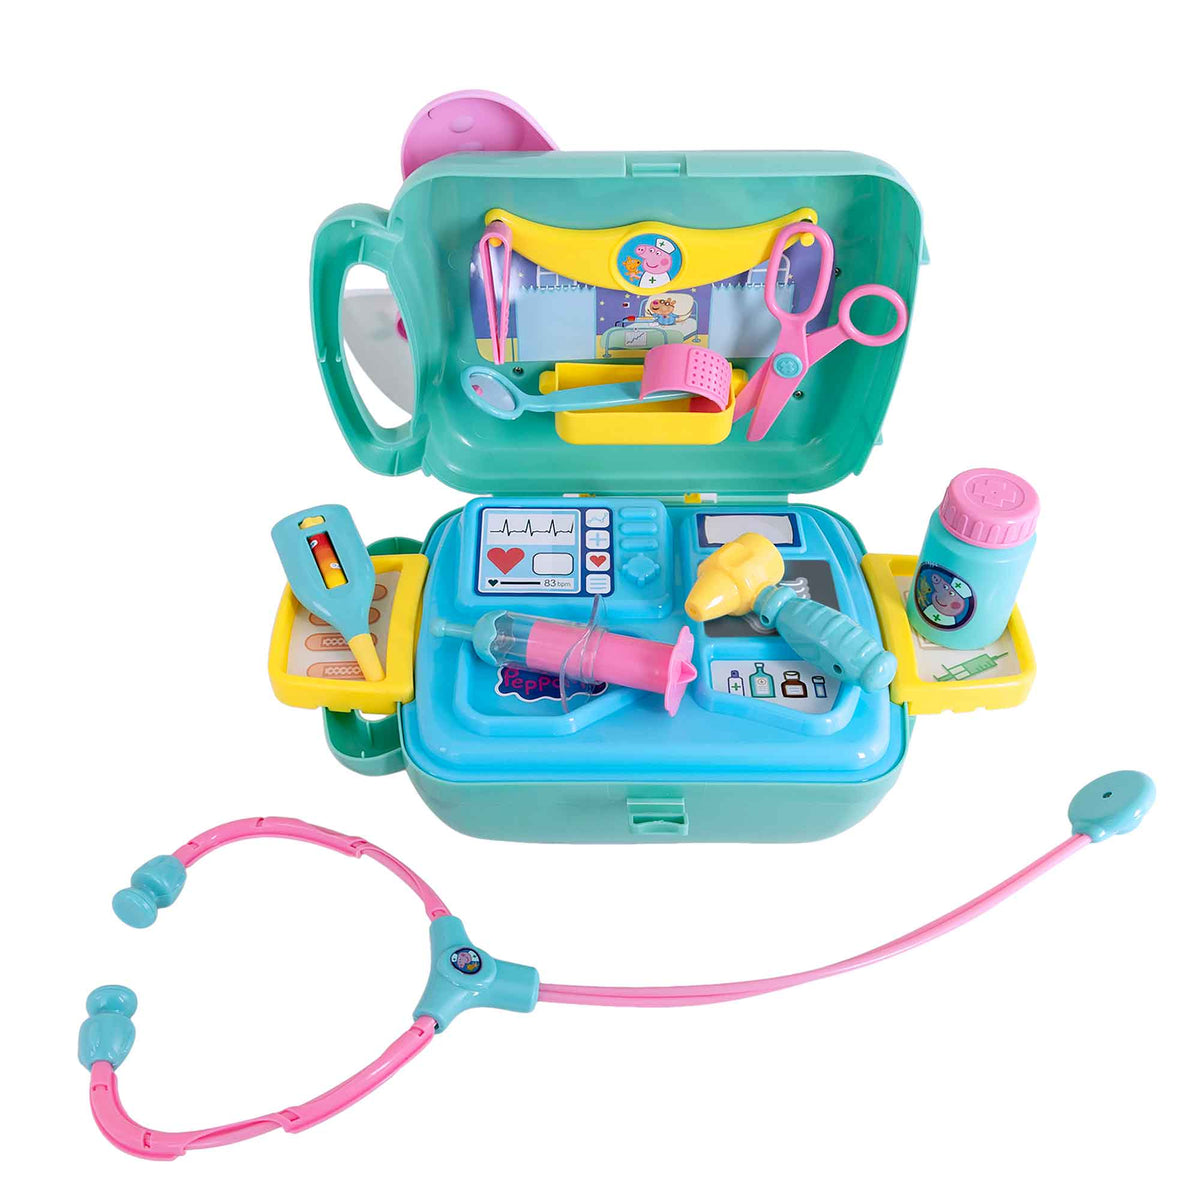 Peppa Pig&#39;s Toy Doctor Set